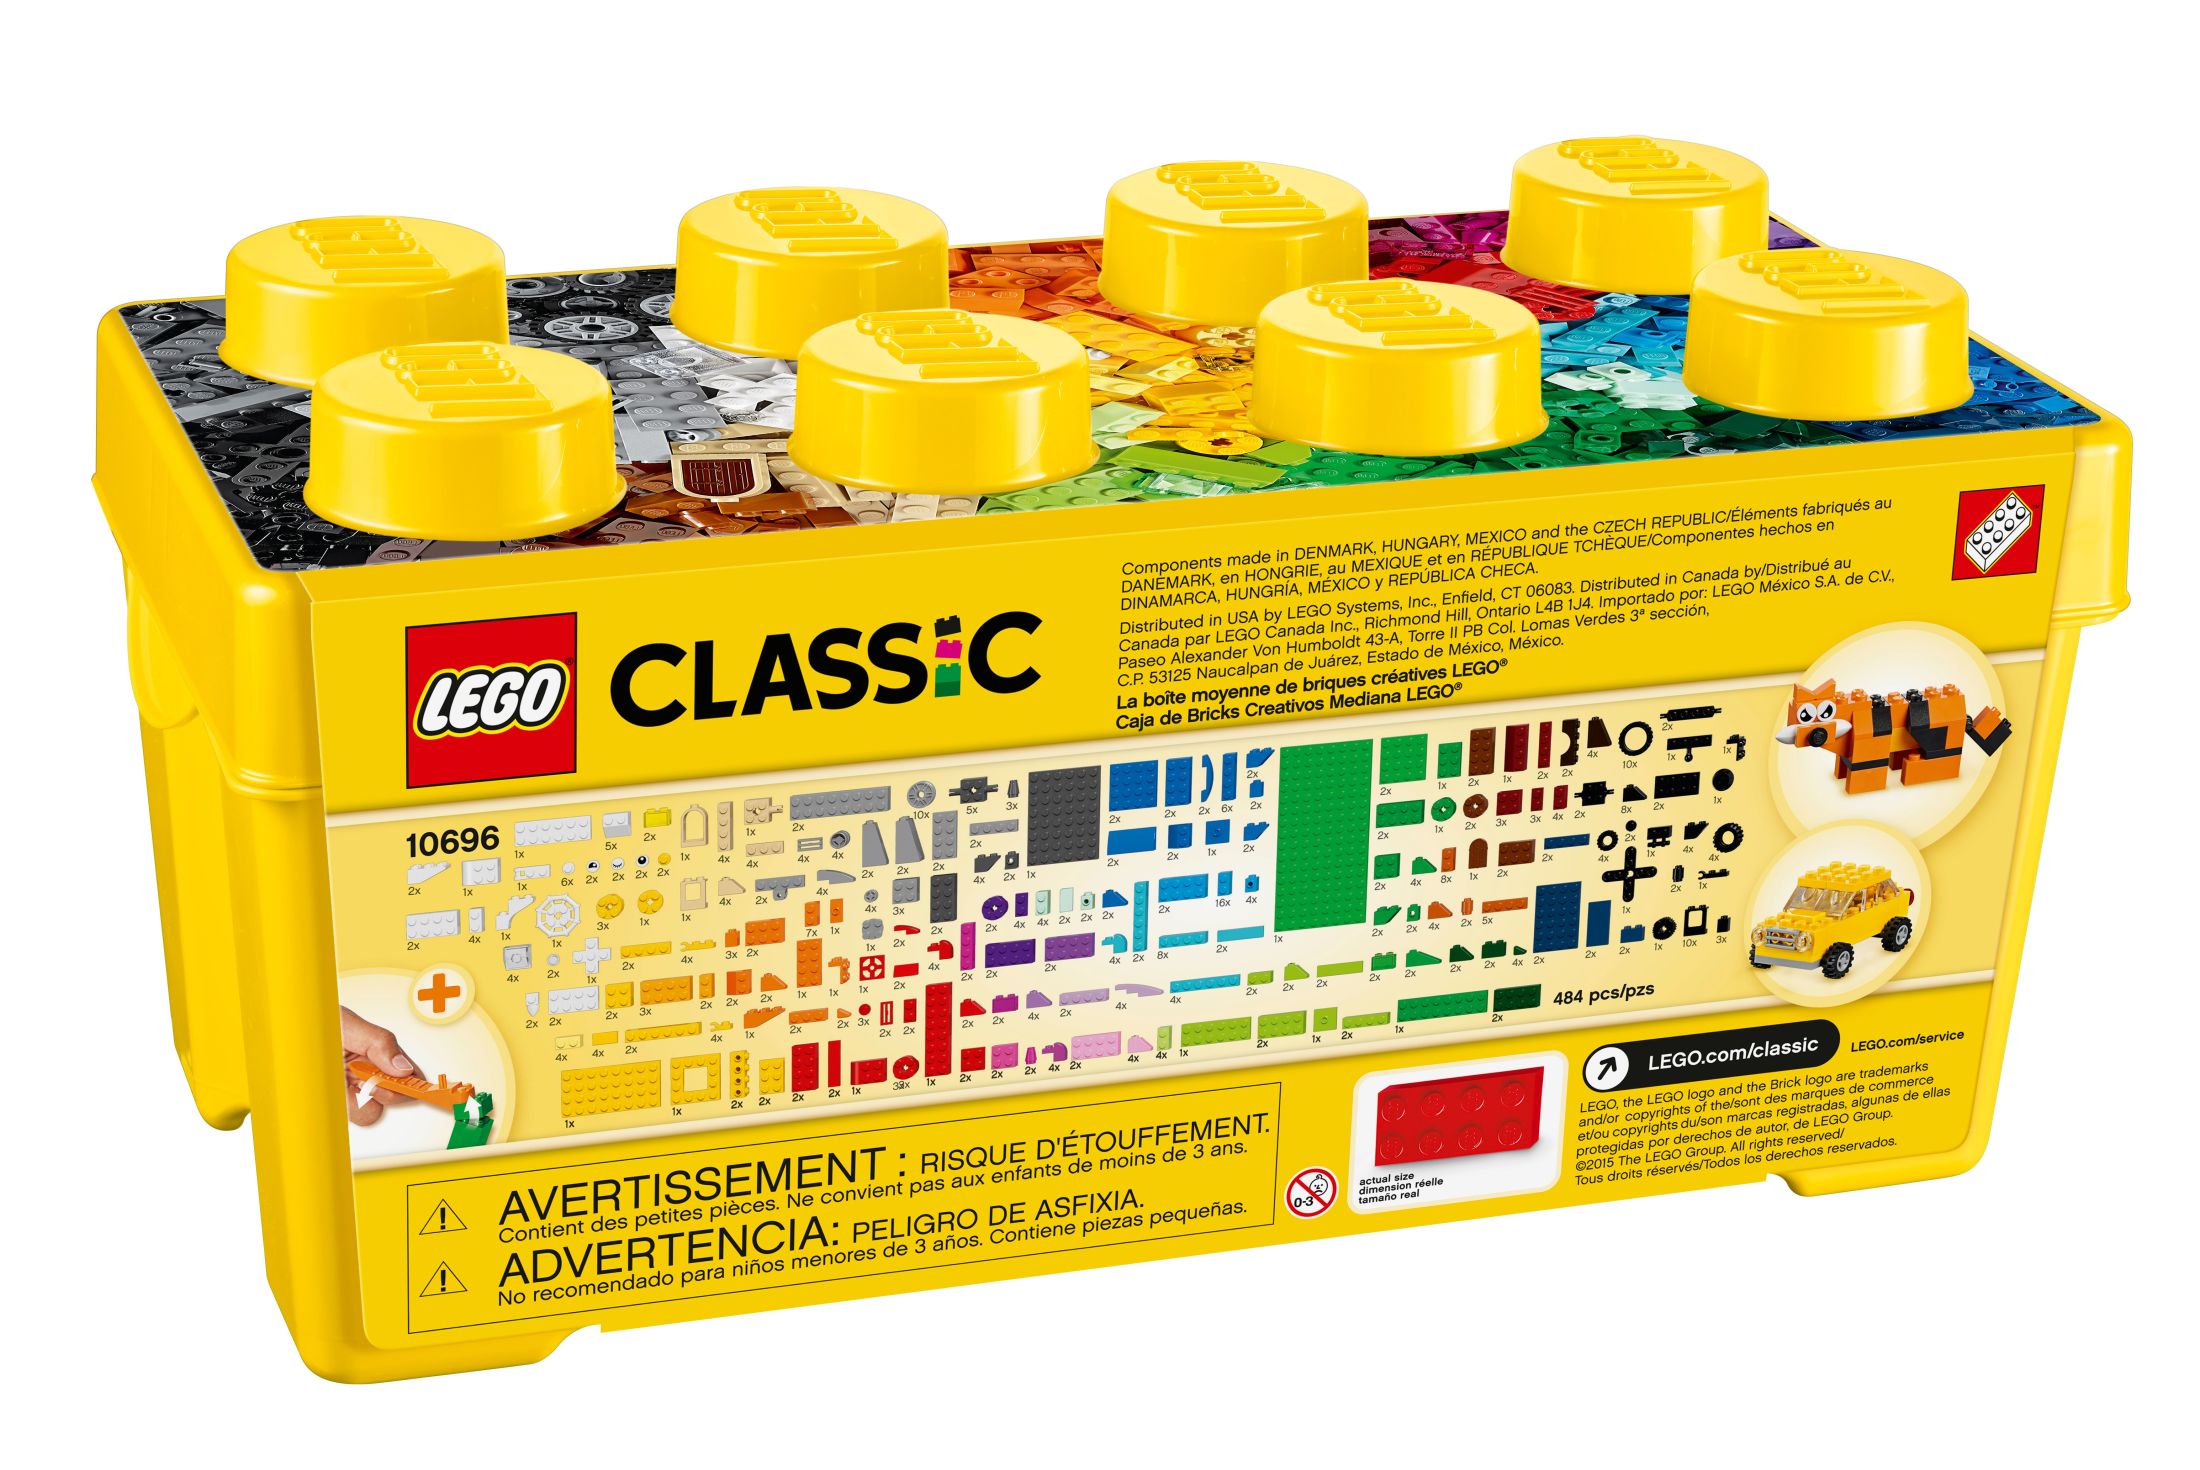 LEGO Classic Medium Creative Brick Box 10696 Building Toy Set with Storage, Includes Train, Car, and a Tiger Figure, Perfect Gift and Playset for Boys and Girls, Sensory Toy for Kids Ages 4 and up - image 5 of 6